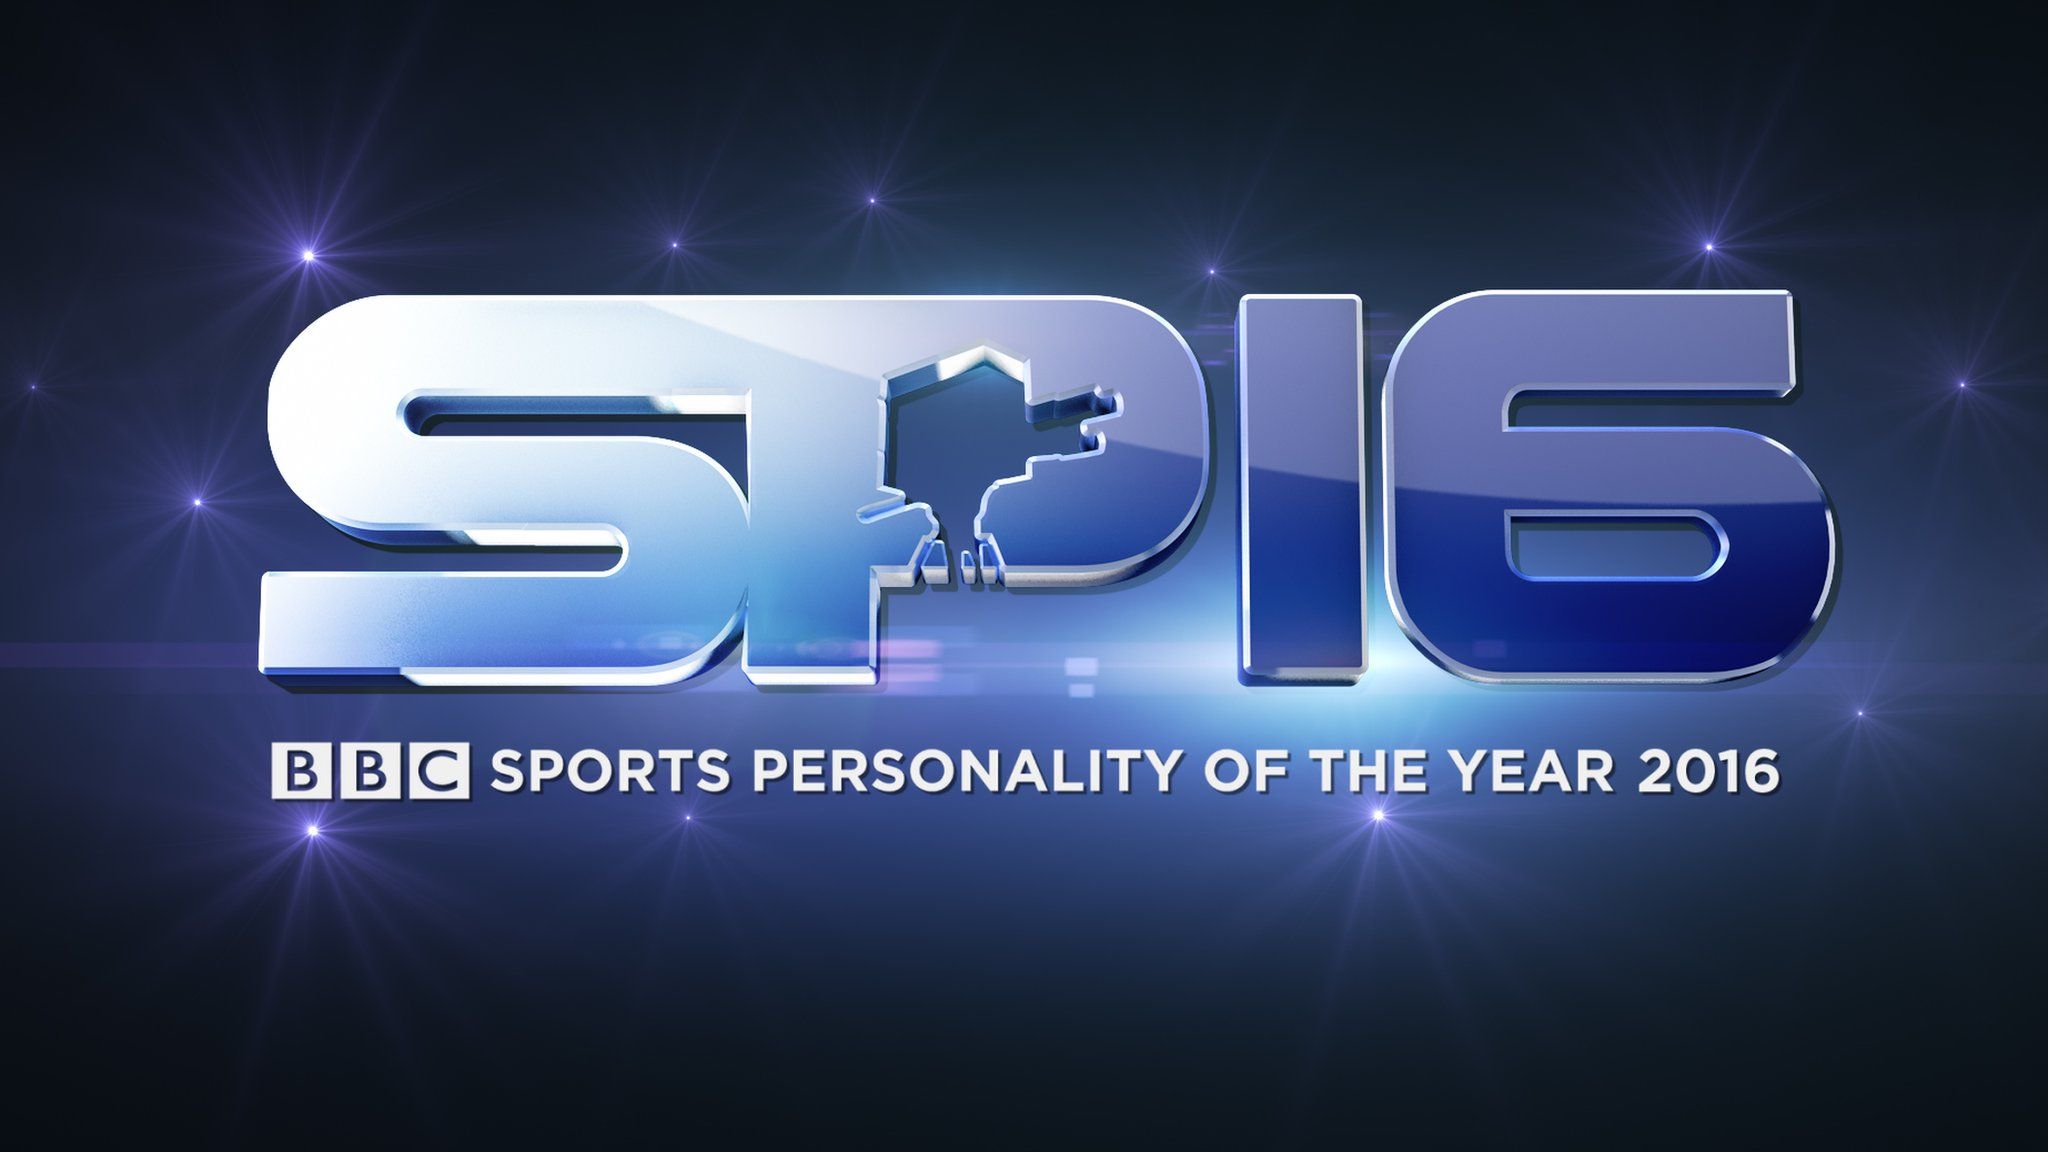 BBC Sports Personality of the Year 2016 logo